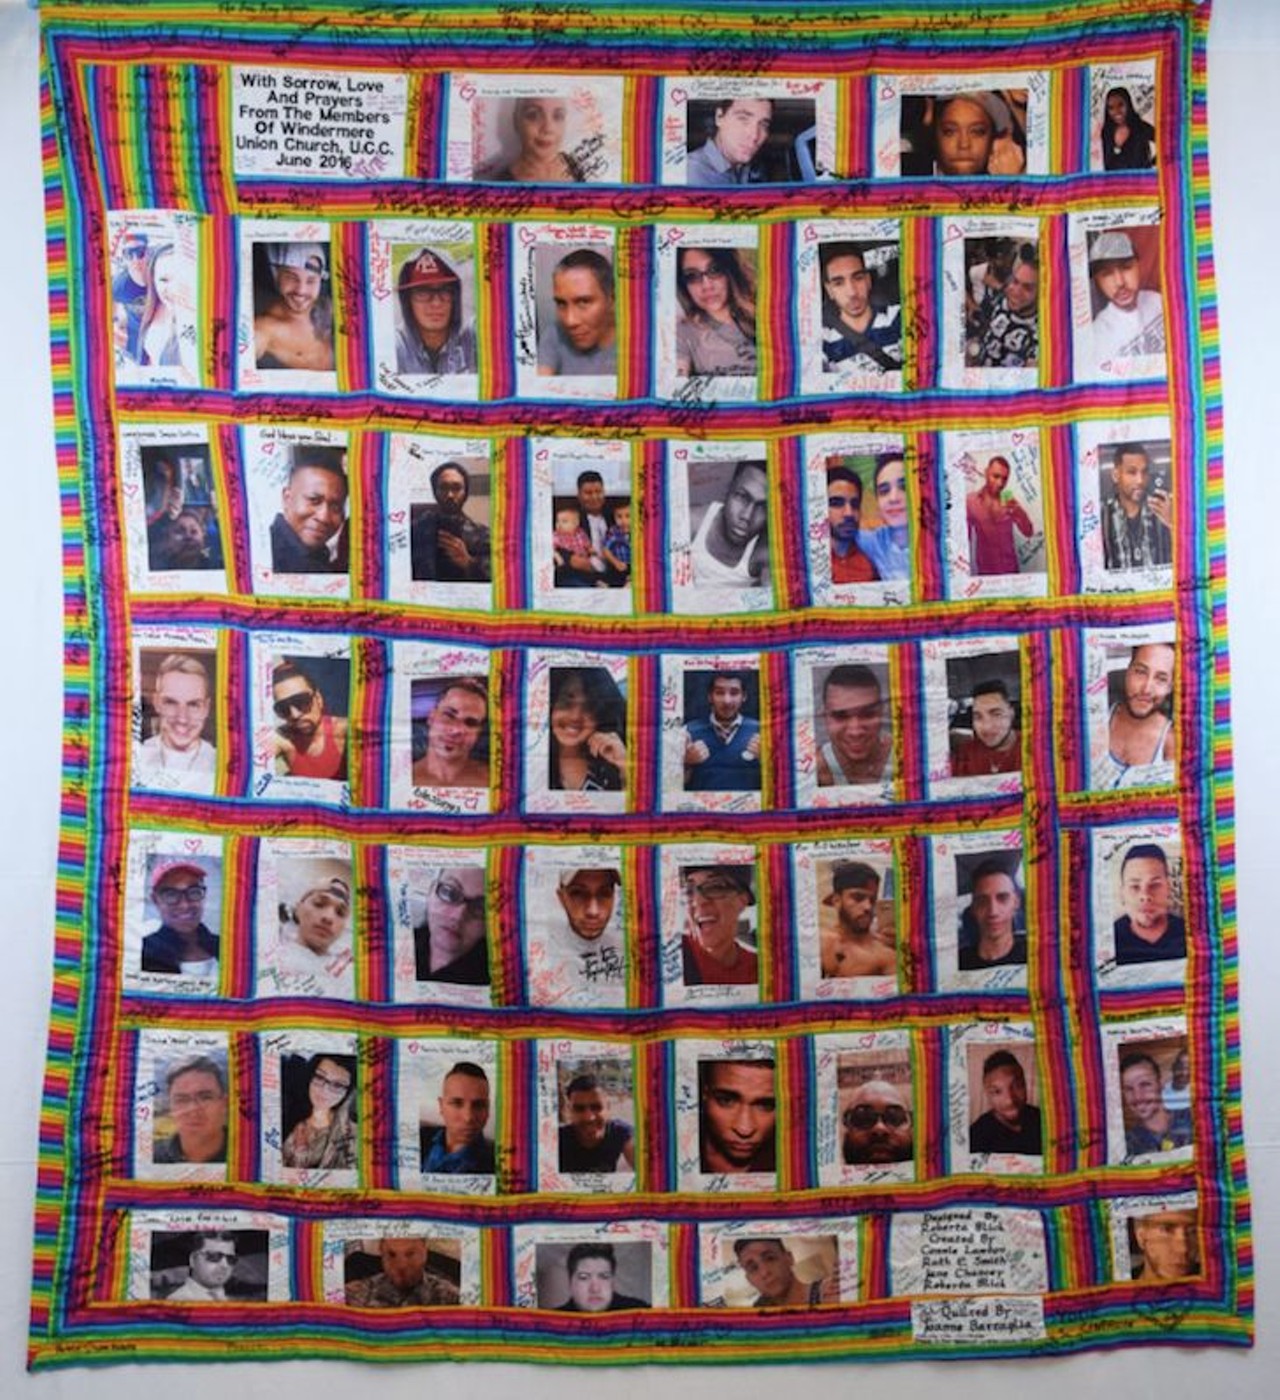 Quilt 
Description: 
Quilt with photos of the 49 victims of the Pulse Nightclub shooting on a rainbow border. The quilt is covered with handwritten messages and signatures.
Historical Notes:
Roberta Blick, a 90-year-old congregant from Windermere Union Church, created this quilt featuring the photos of those who died at Pulse. Nancy Rosado of Proyecto Somos Orlando, a new service organization supporting those affected, traveled with the quilt. She gathered signatures, including those of President Barack Obama, Jennifer Lopez, Lin-Manuel Miranda, and Hillary Clinton. This quilt was her last creation before she passed away on December 20, 2017.